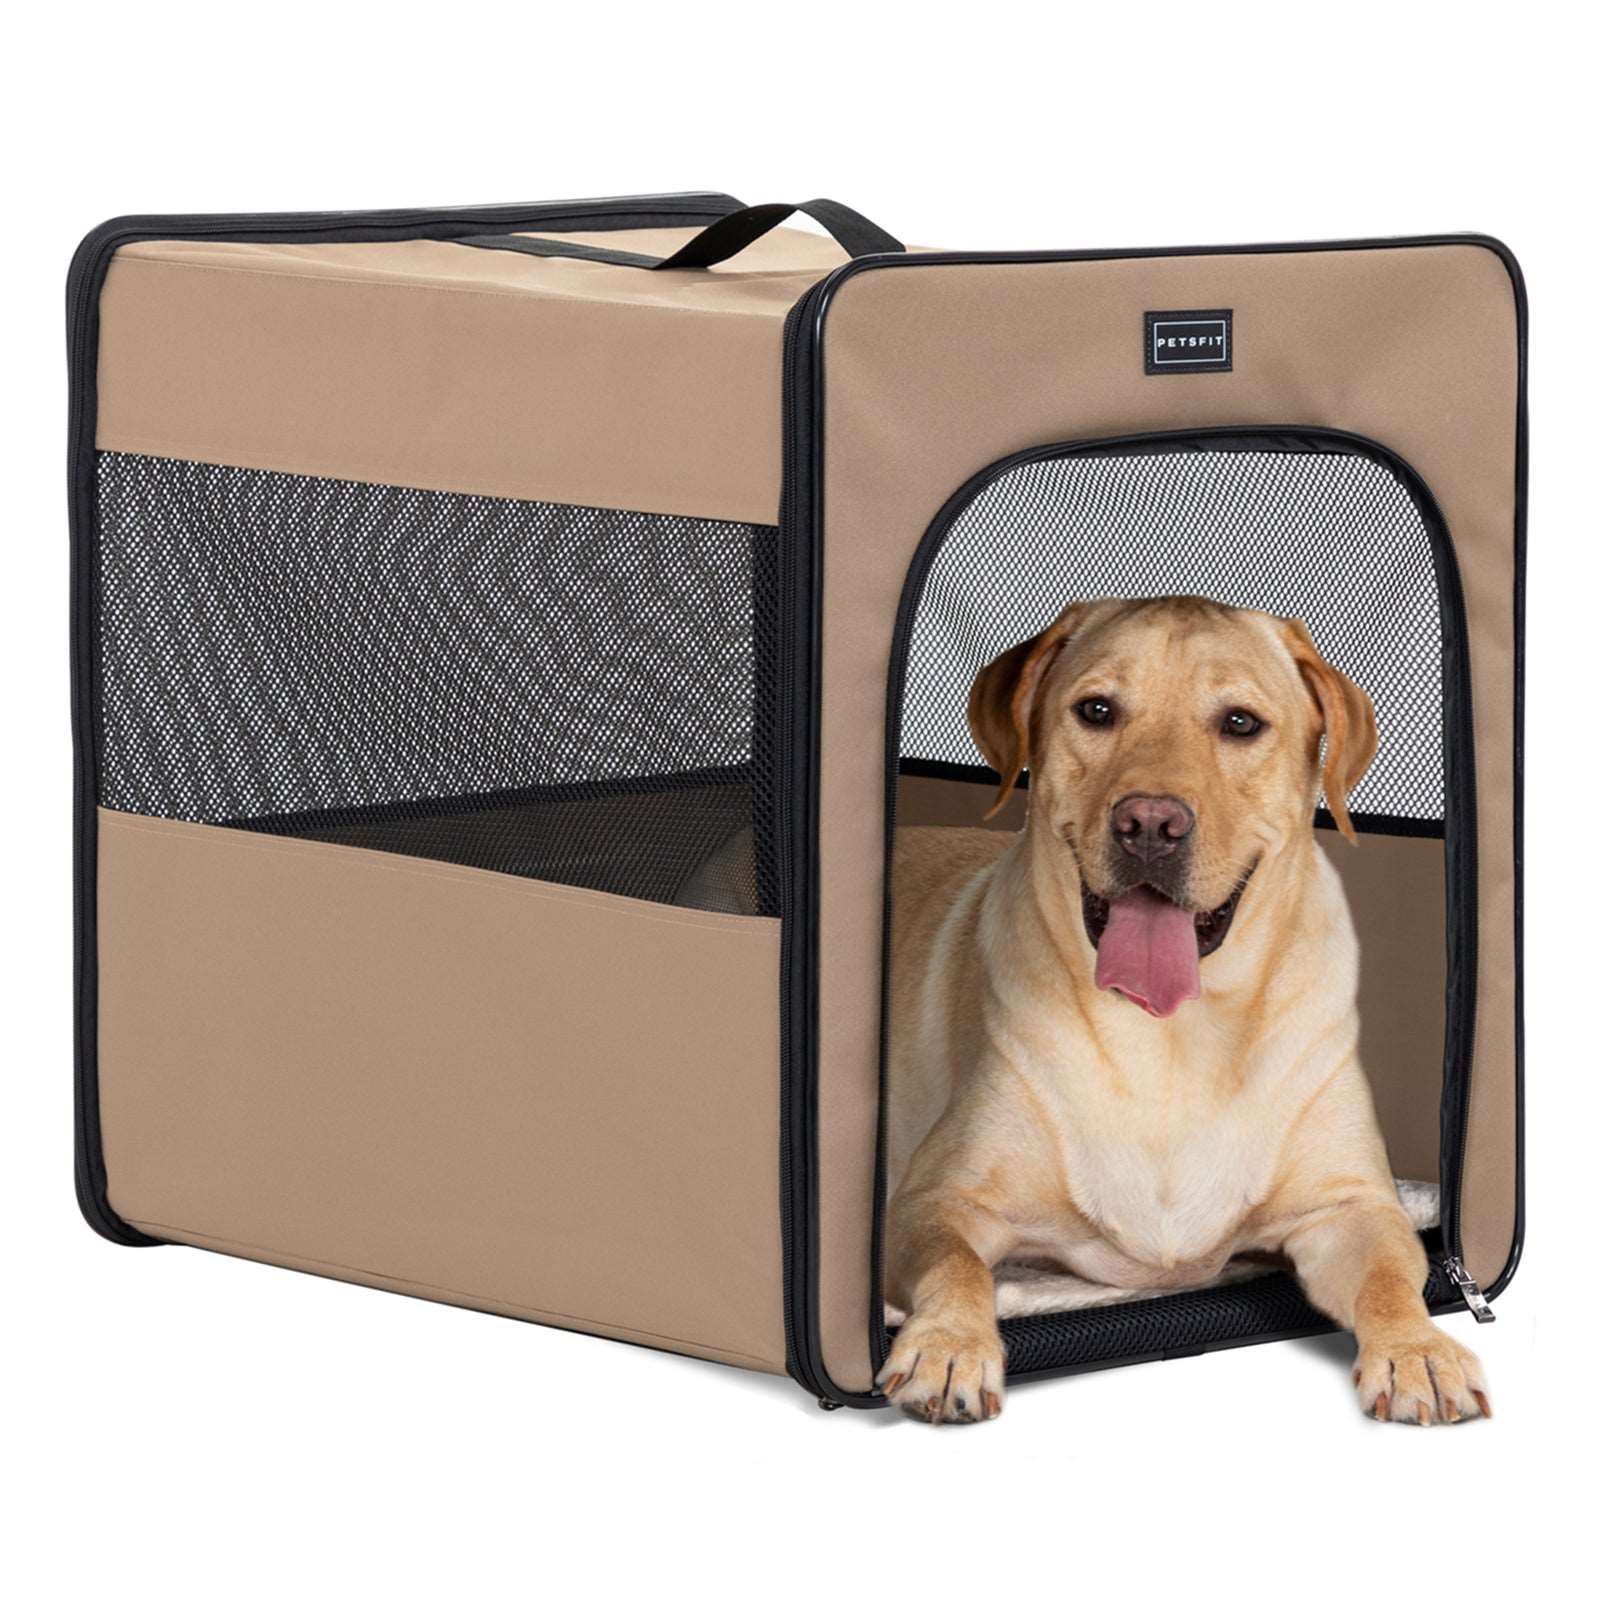 Petsfit-Portable-Dog-Crate-24-Inch-11